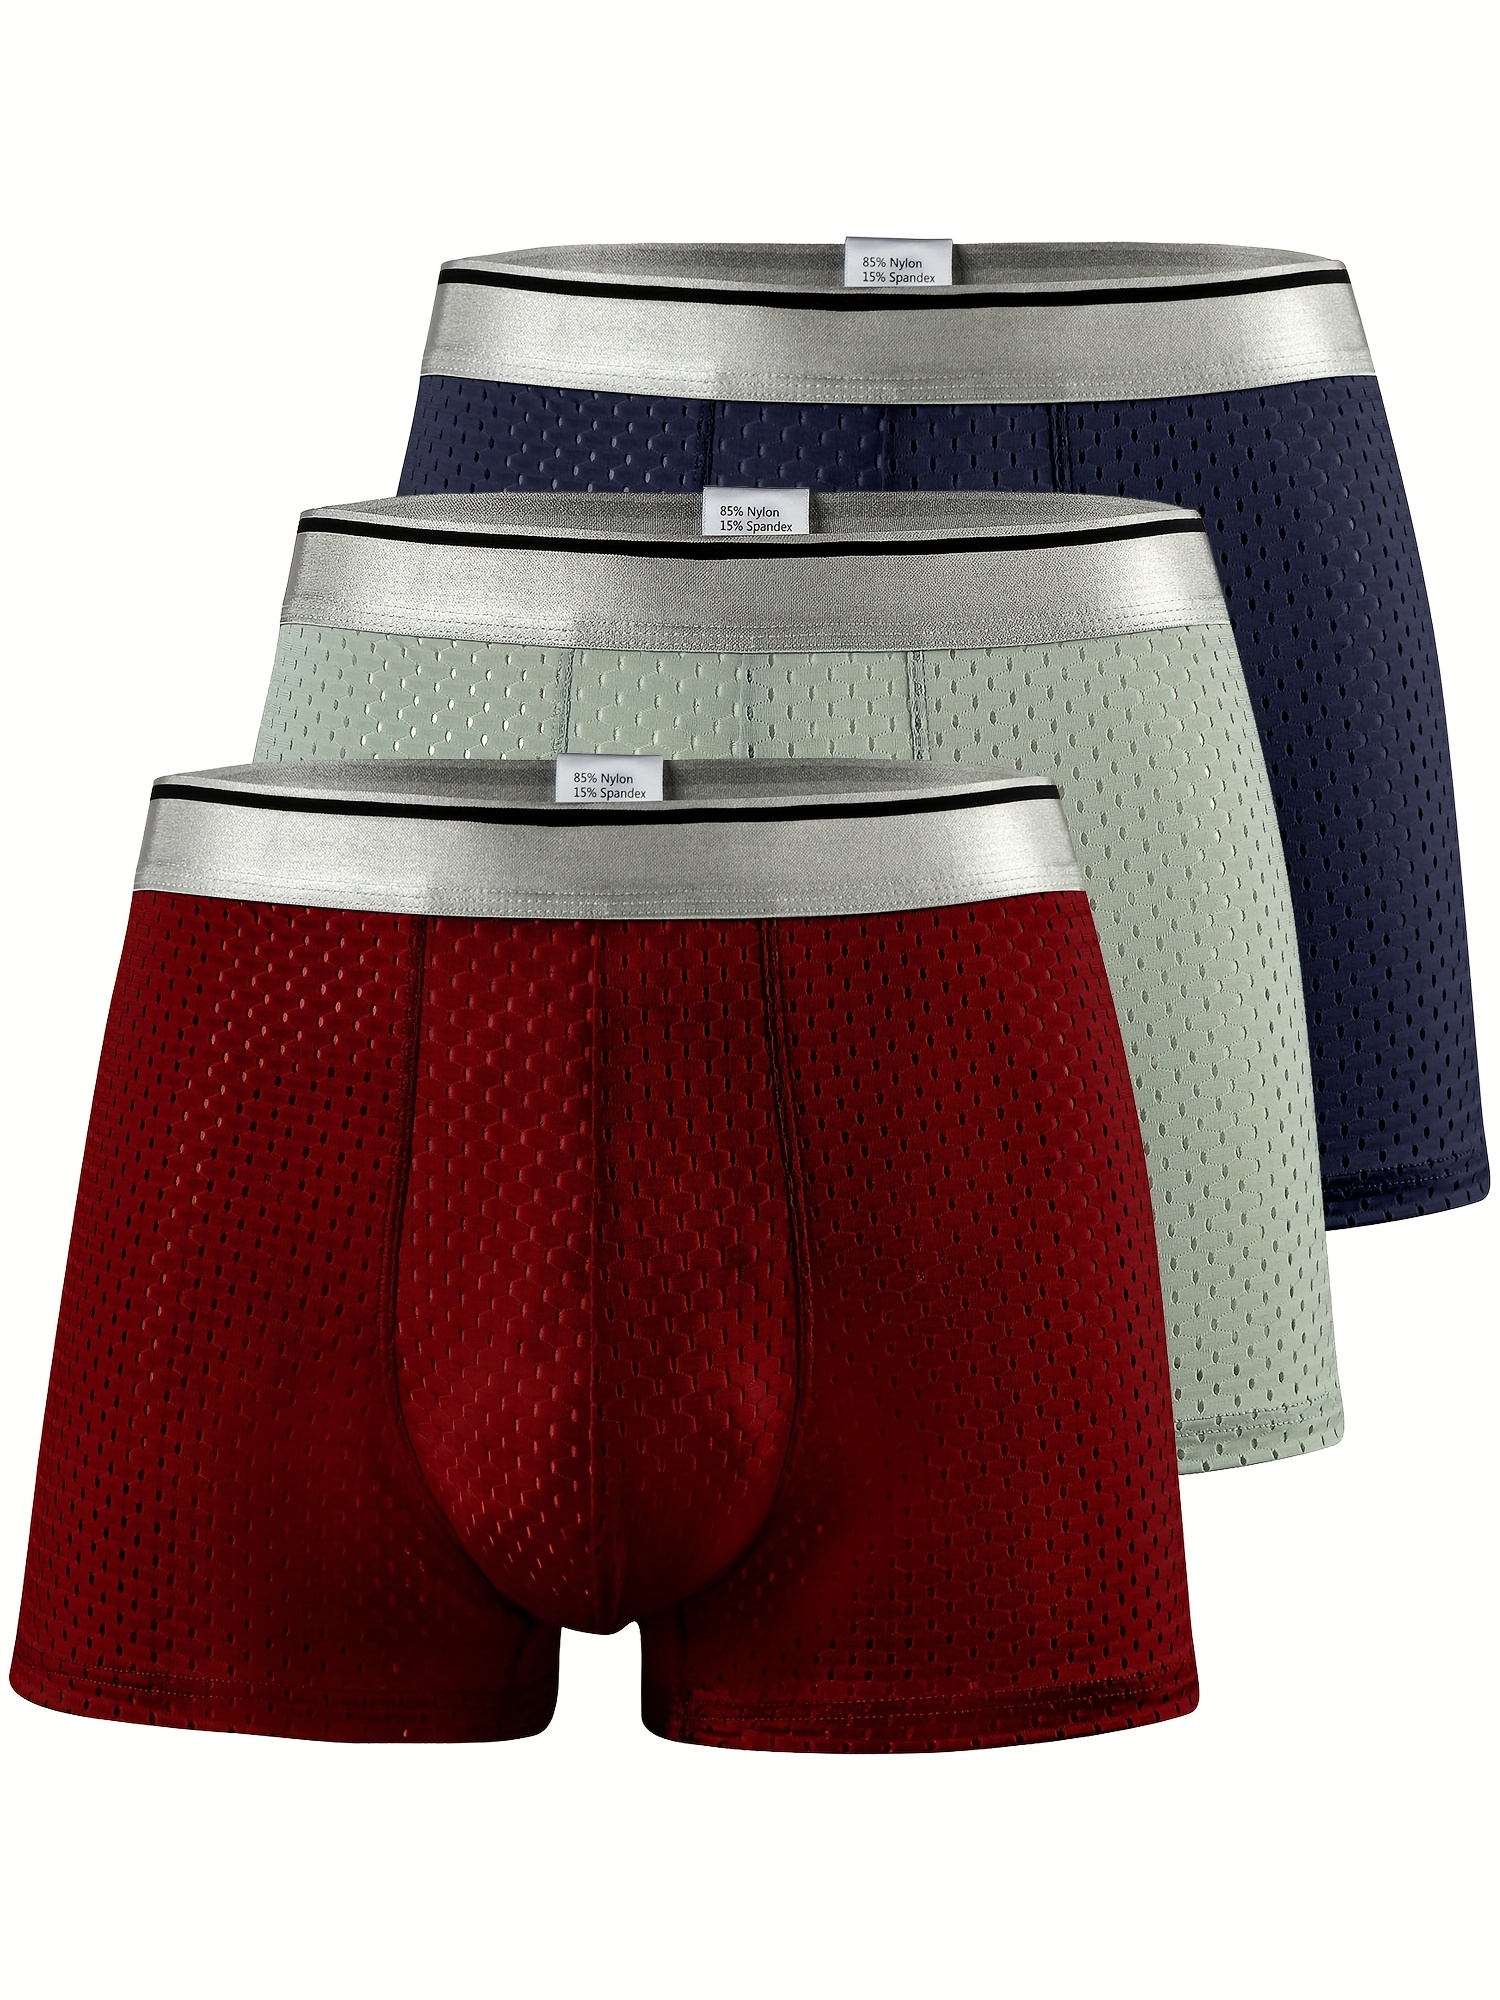 Big And Tall Underwear: Big & Tall BOXER Shorts And Briefs